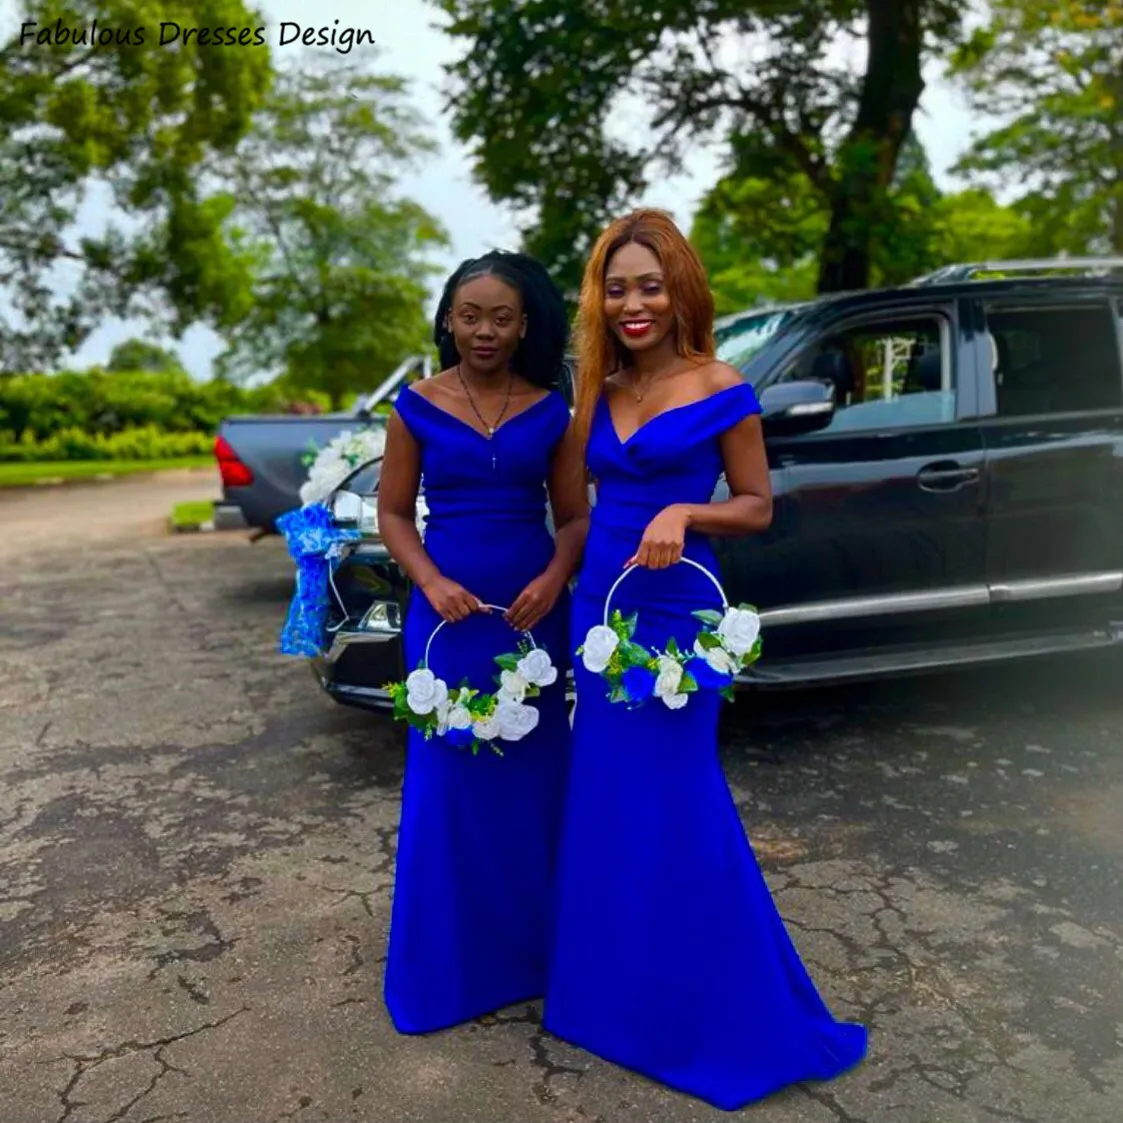 

Royal Blue Long Mermaid Bridesmaid Dresses Off Shoulder V-neck Trumpet Wedding Guest Dress For African Women Prom Party Gown